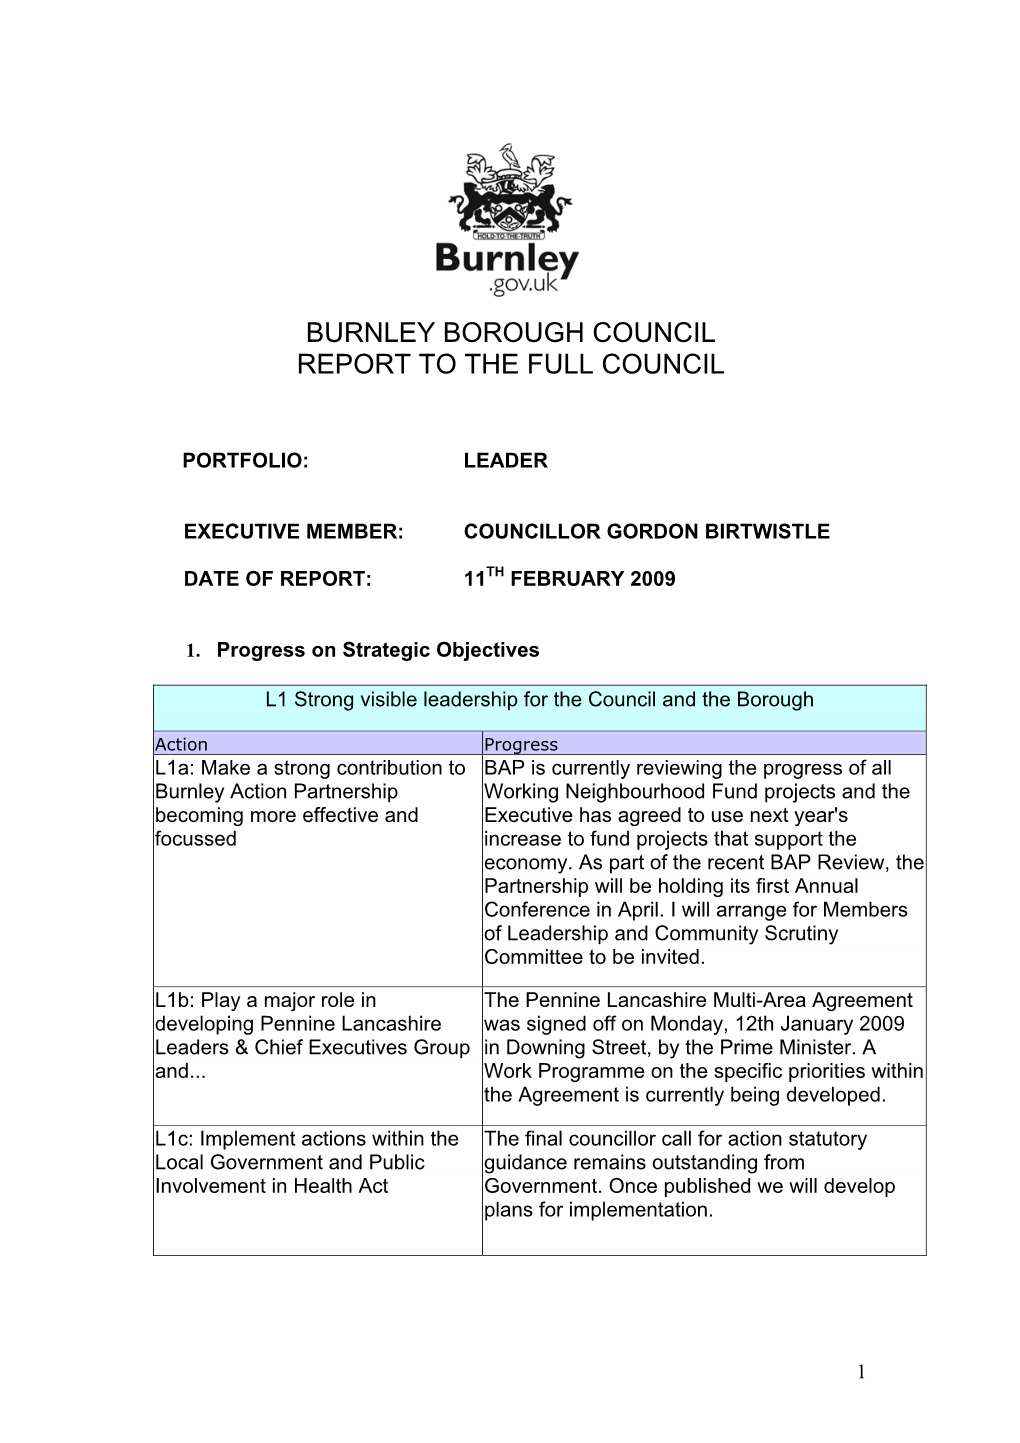 Burnley Borough Council Report to the Full Council